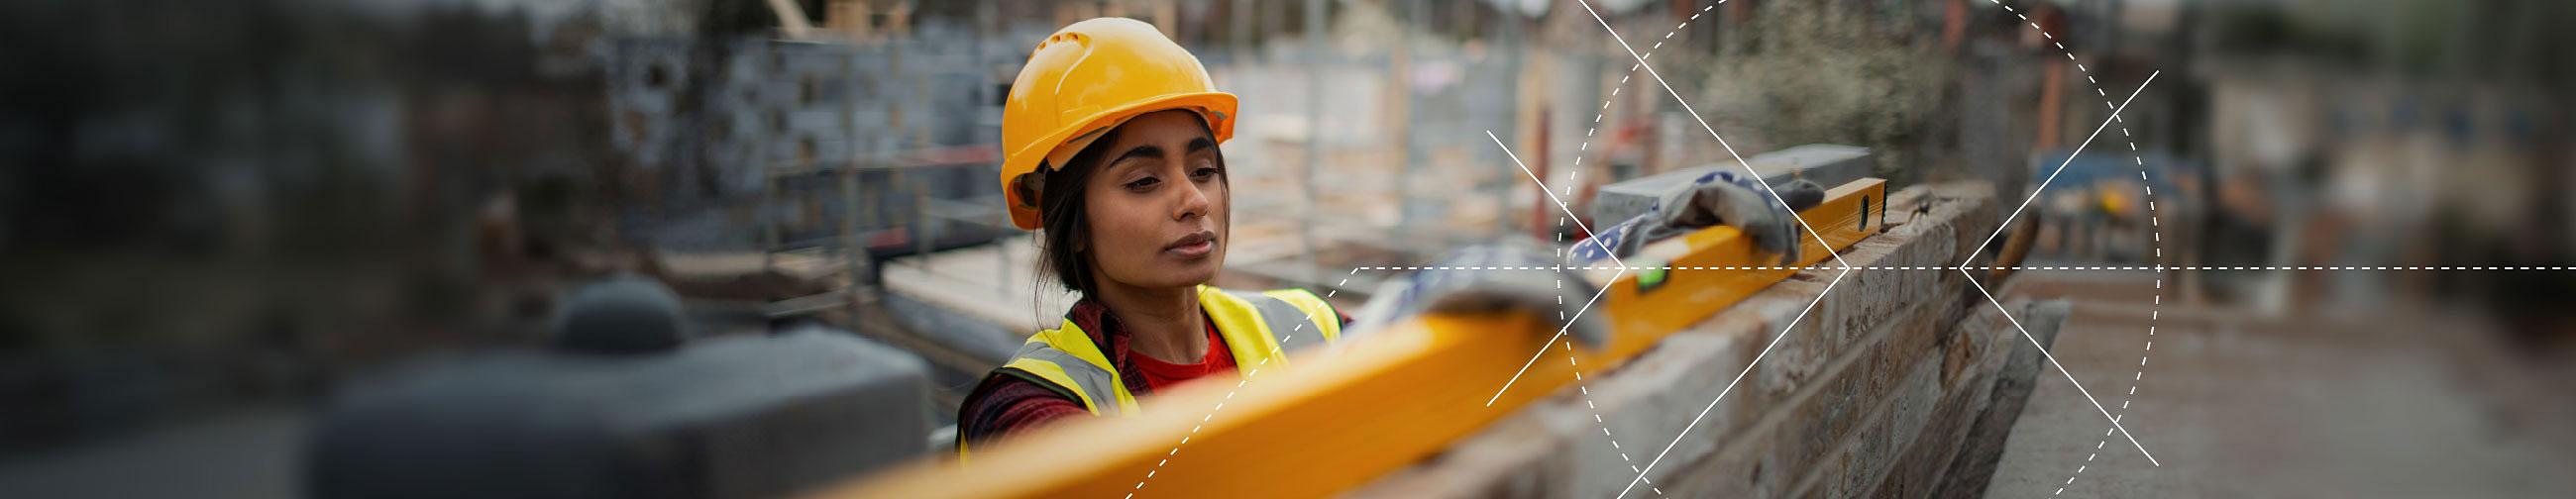  Female worker wearing a yellow safety helmet on a large construction site